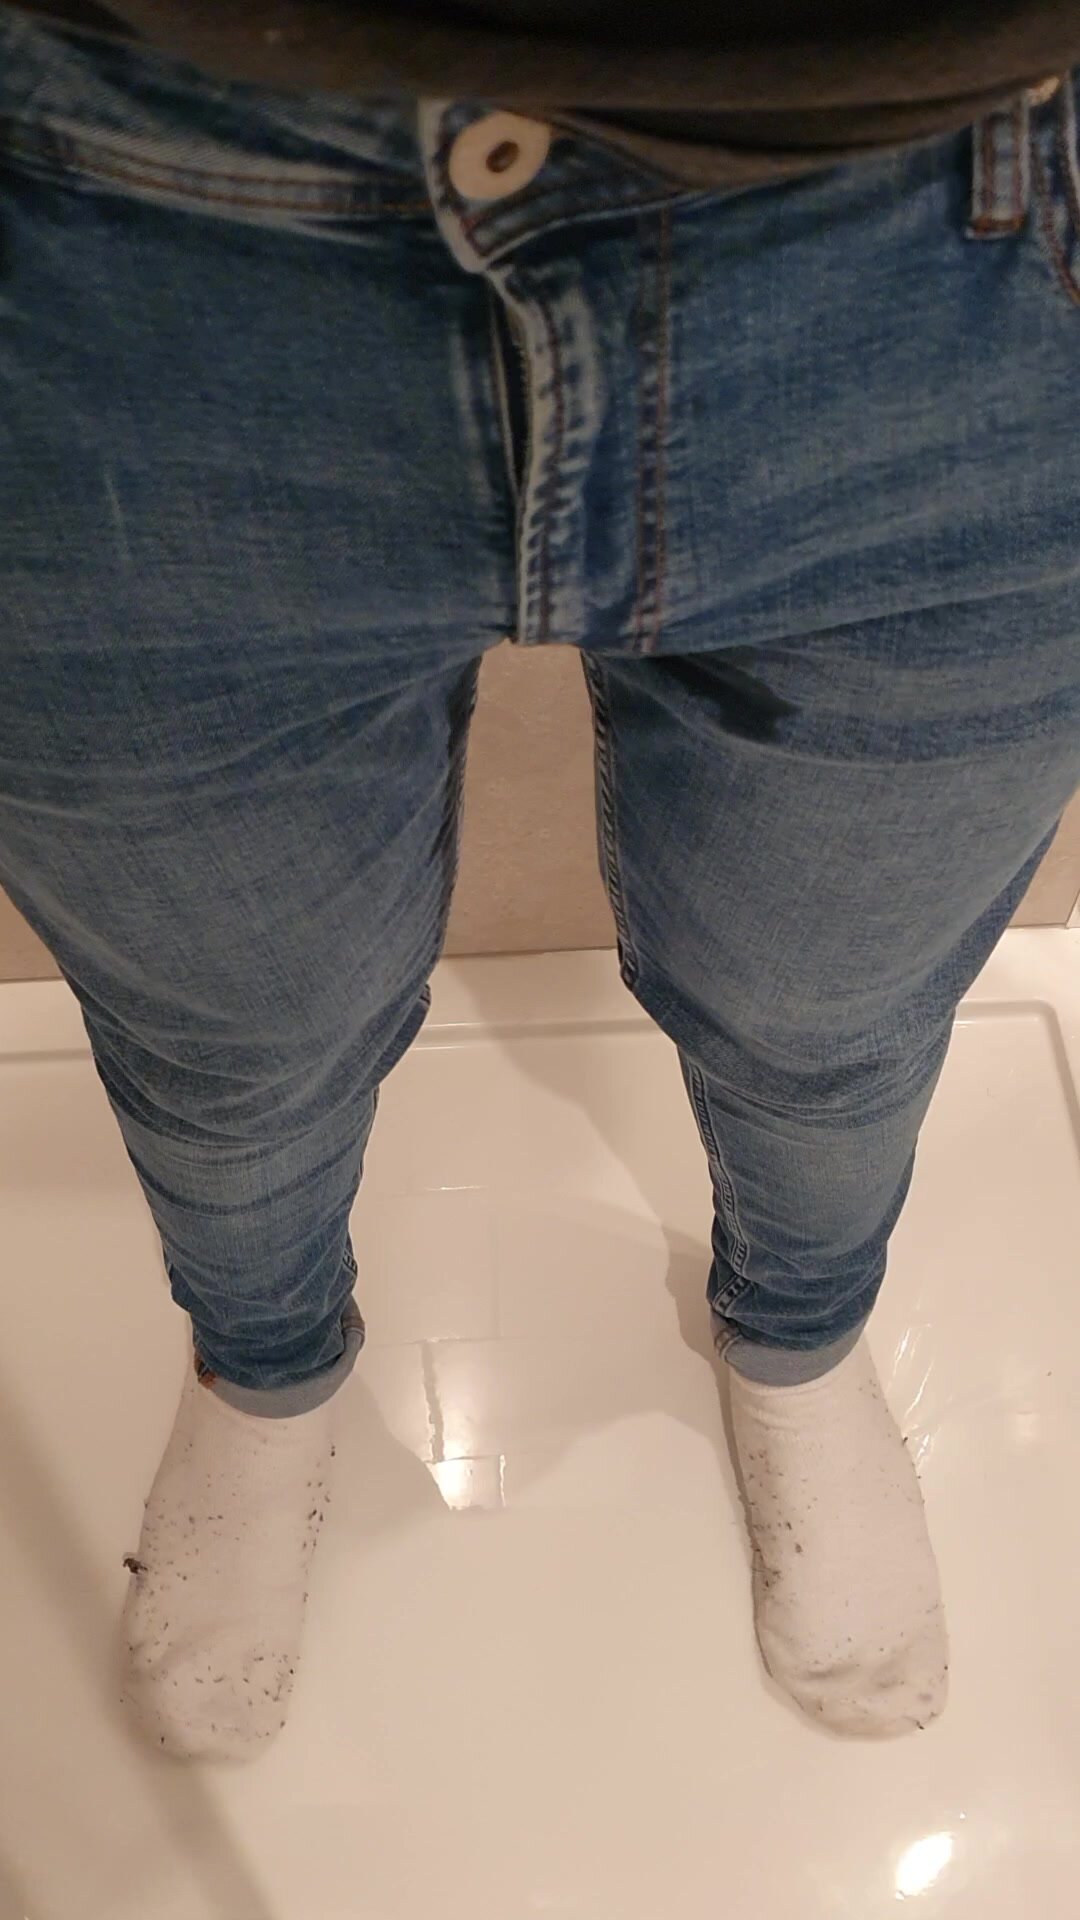 Peeing my jeans - video 2